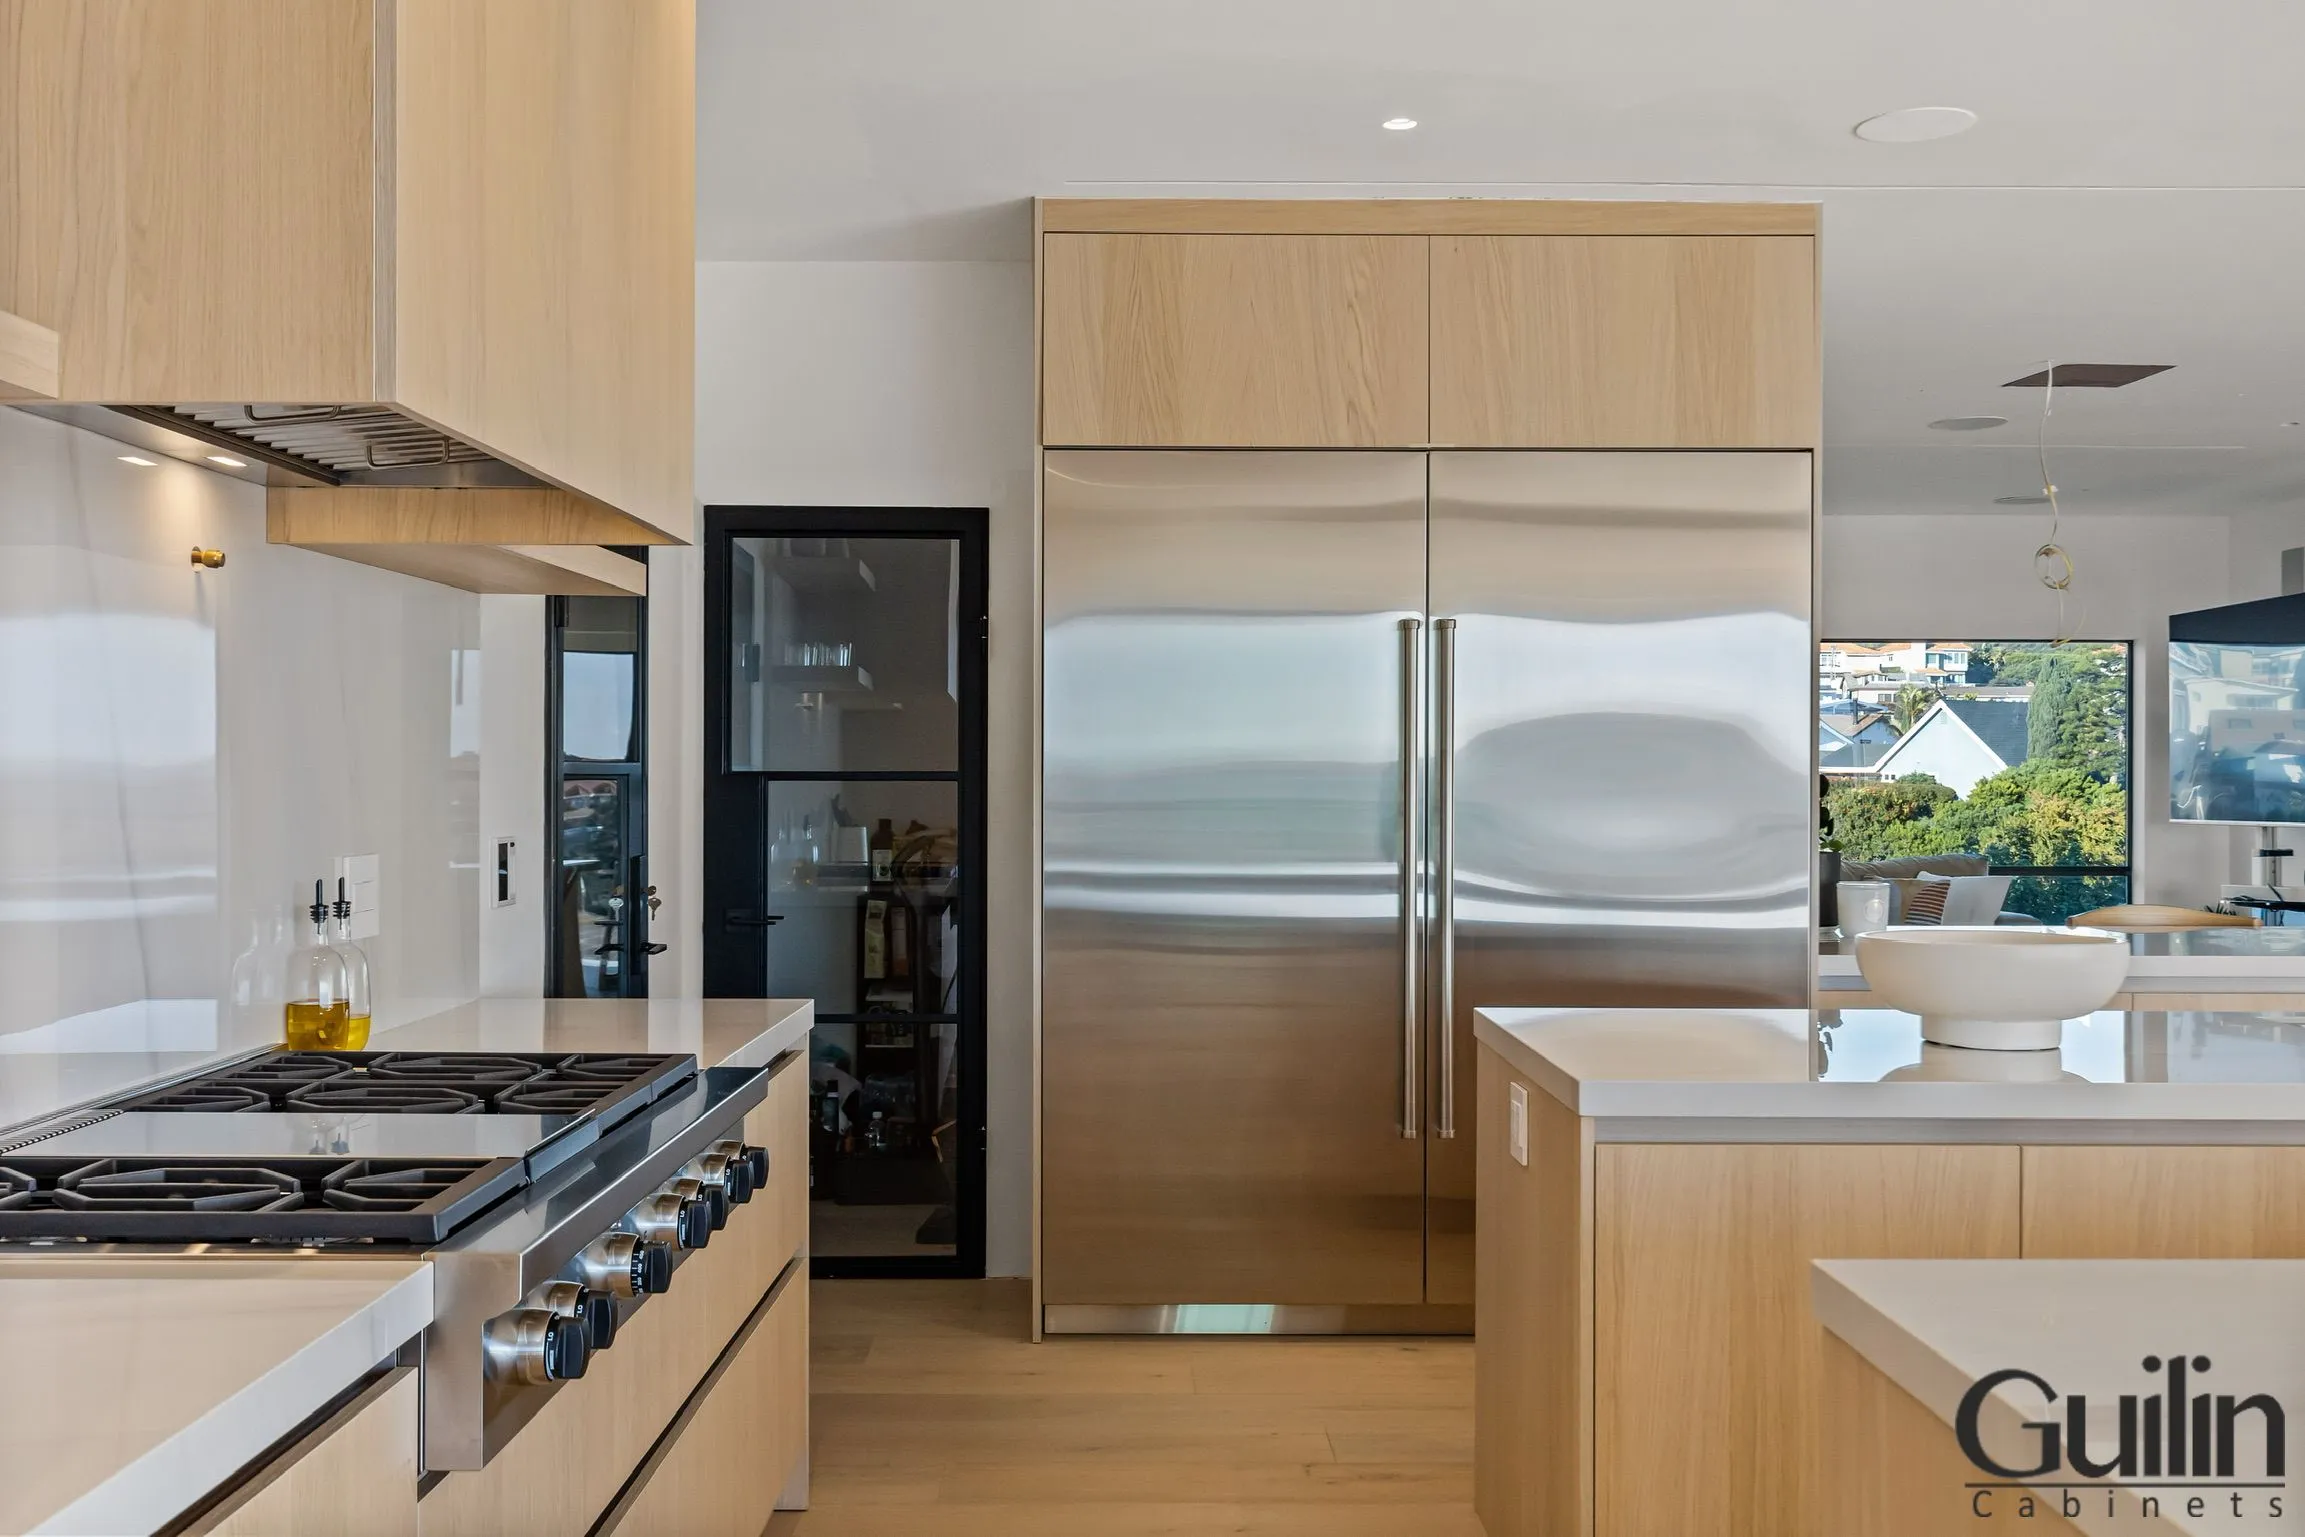 Stainless steel ovens and refrigerators to induction cooktops and range hoods, these appliances provide a versatile, clean aesthetic that is sure to make any kitchen look stunning.